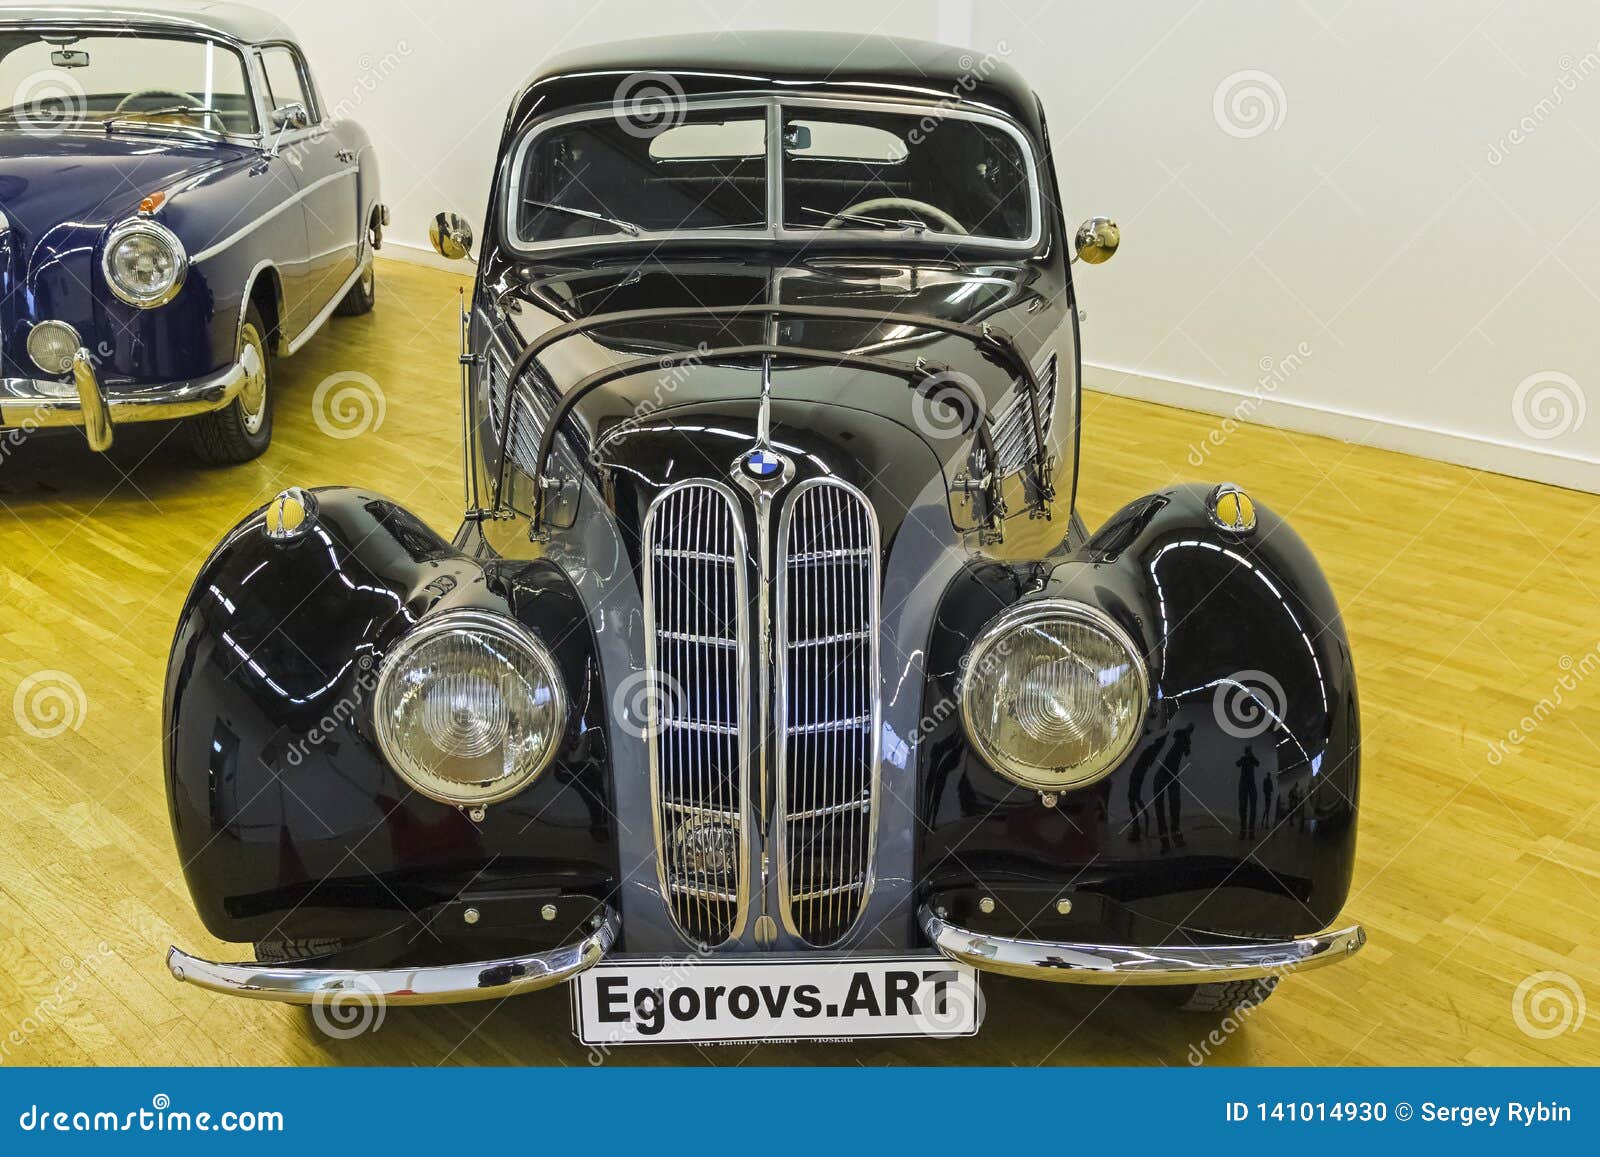 BMW 327 Coupe Car Made in 1939 Editorial Image - Image of coupe ...